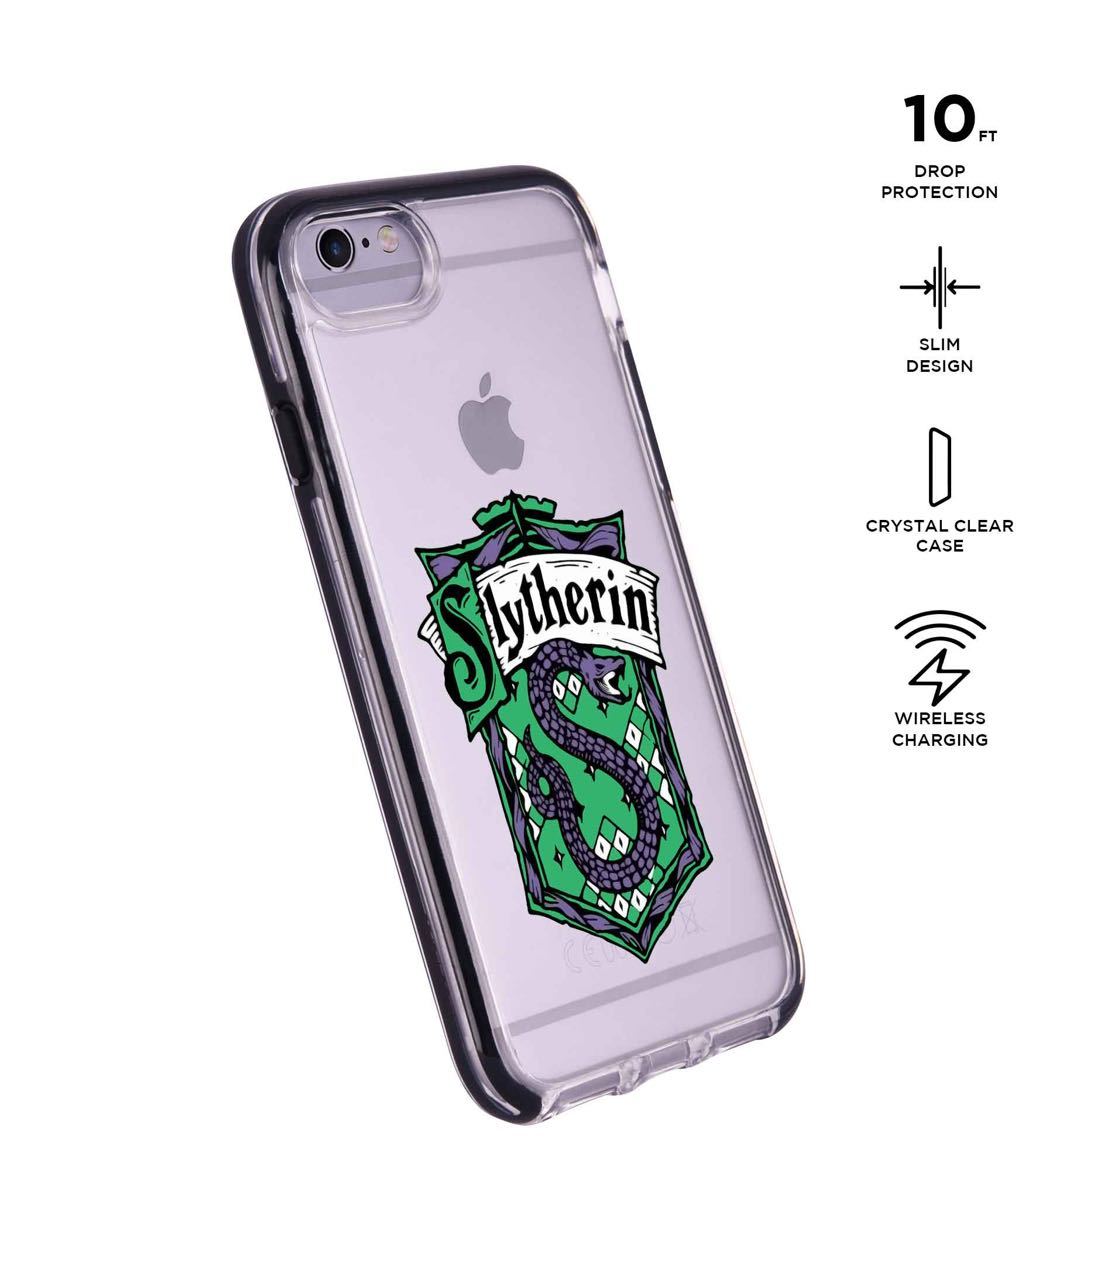 Crest Slytherin - Extreme Phone Case for iPhone 6S Plus